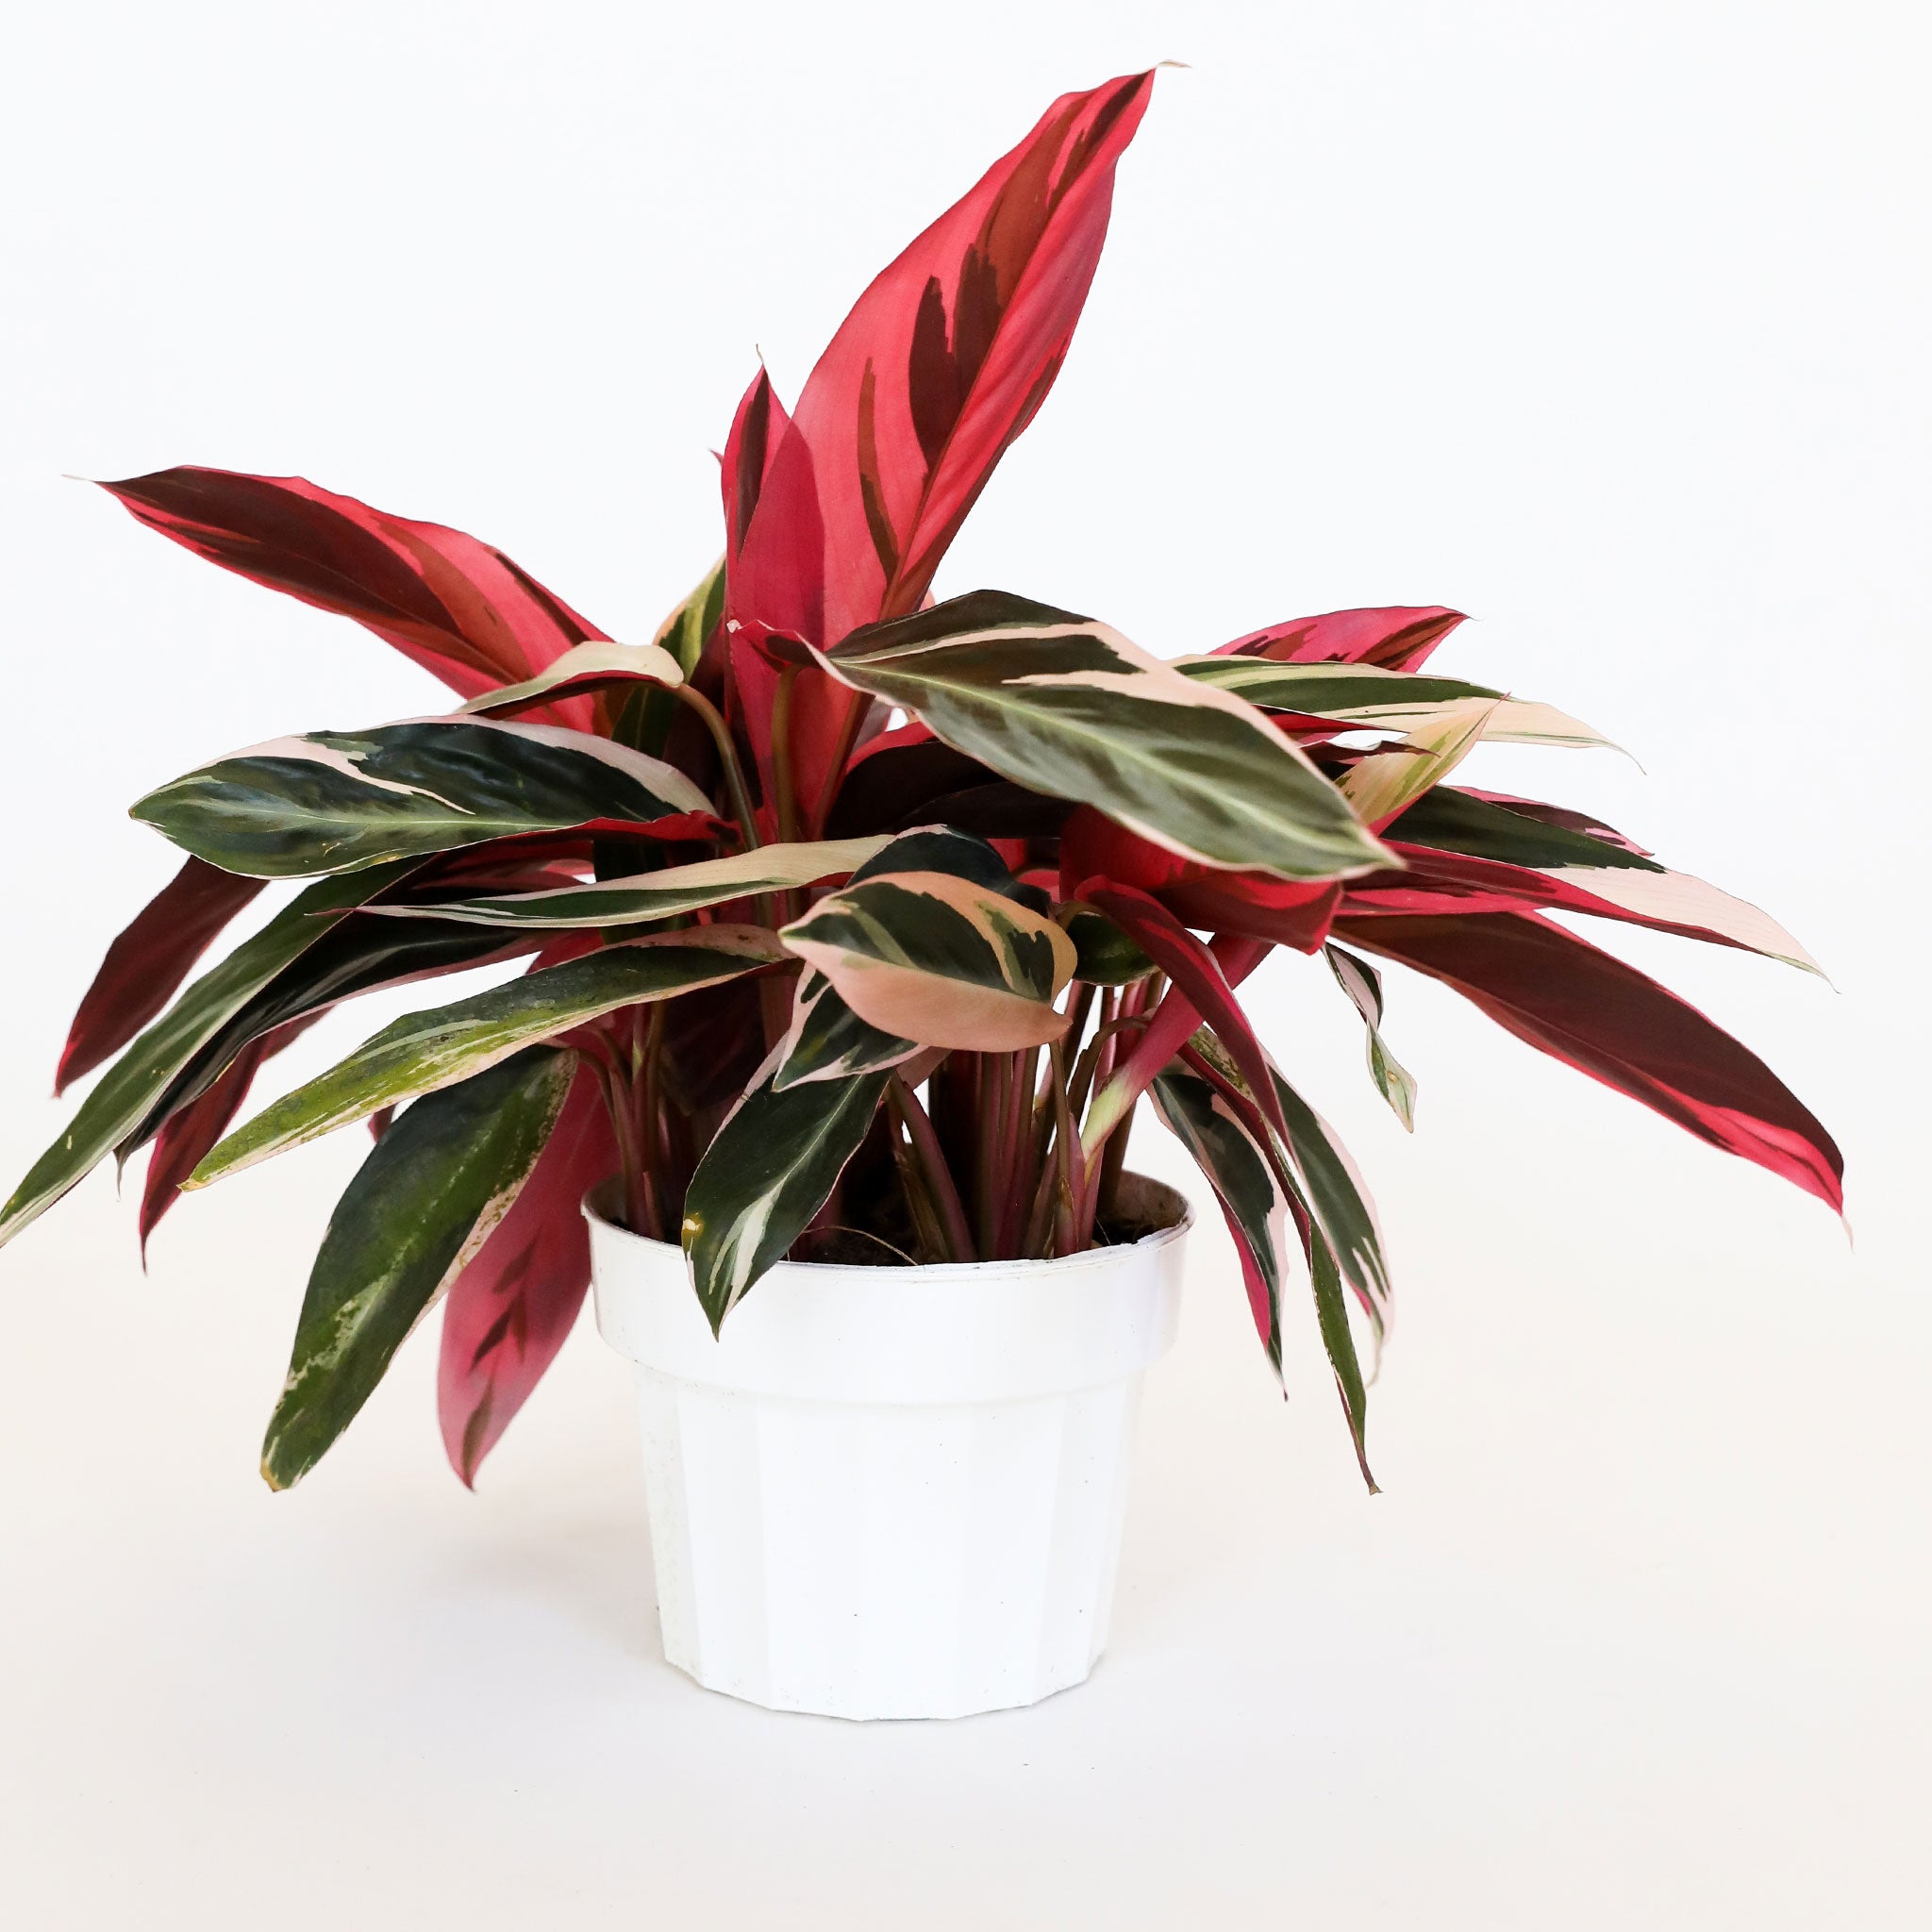 Against a white background is a triostar in a white pot. The long, tall leaves of this plant are green with a blush color painted on the leaves. Some leaves are more green while others are more blush. The bottom of the leaves are dark pink.